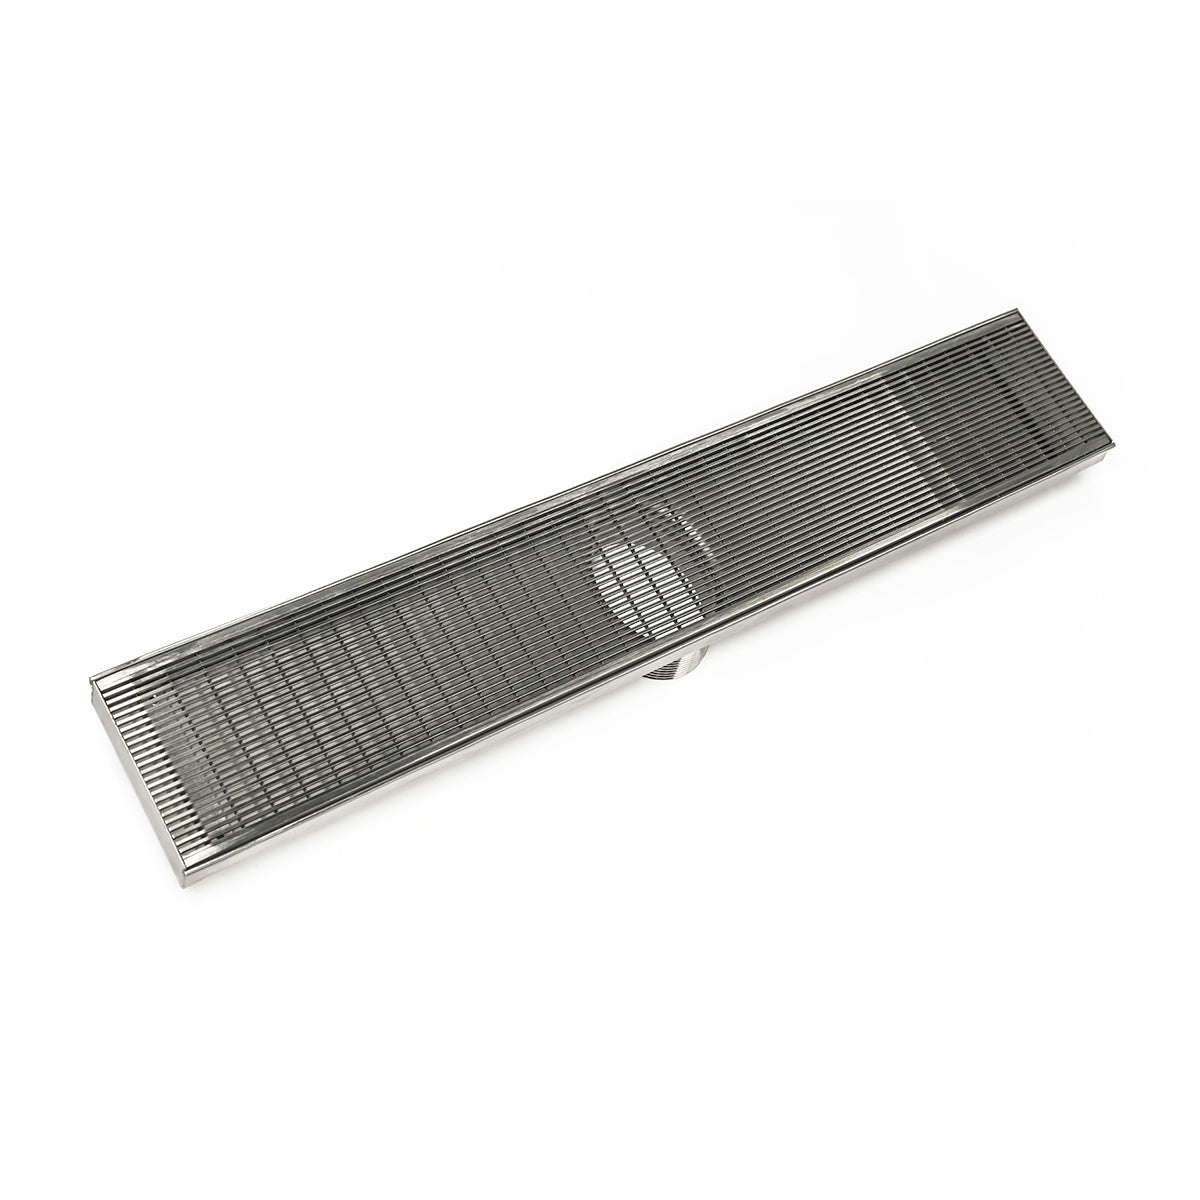 Infinity Drain 60" FX Series High Flow Fixed Length Linear Drain Kit with Wedge Wire Grate with ABS Drain Body